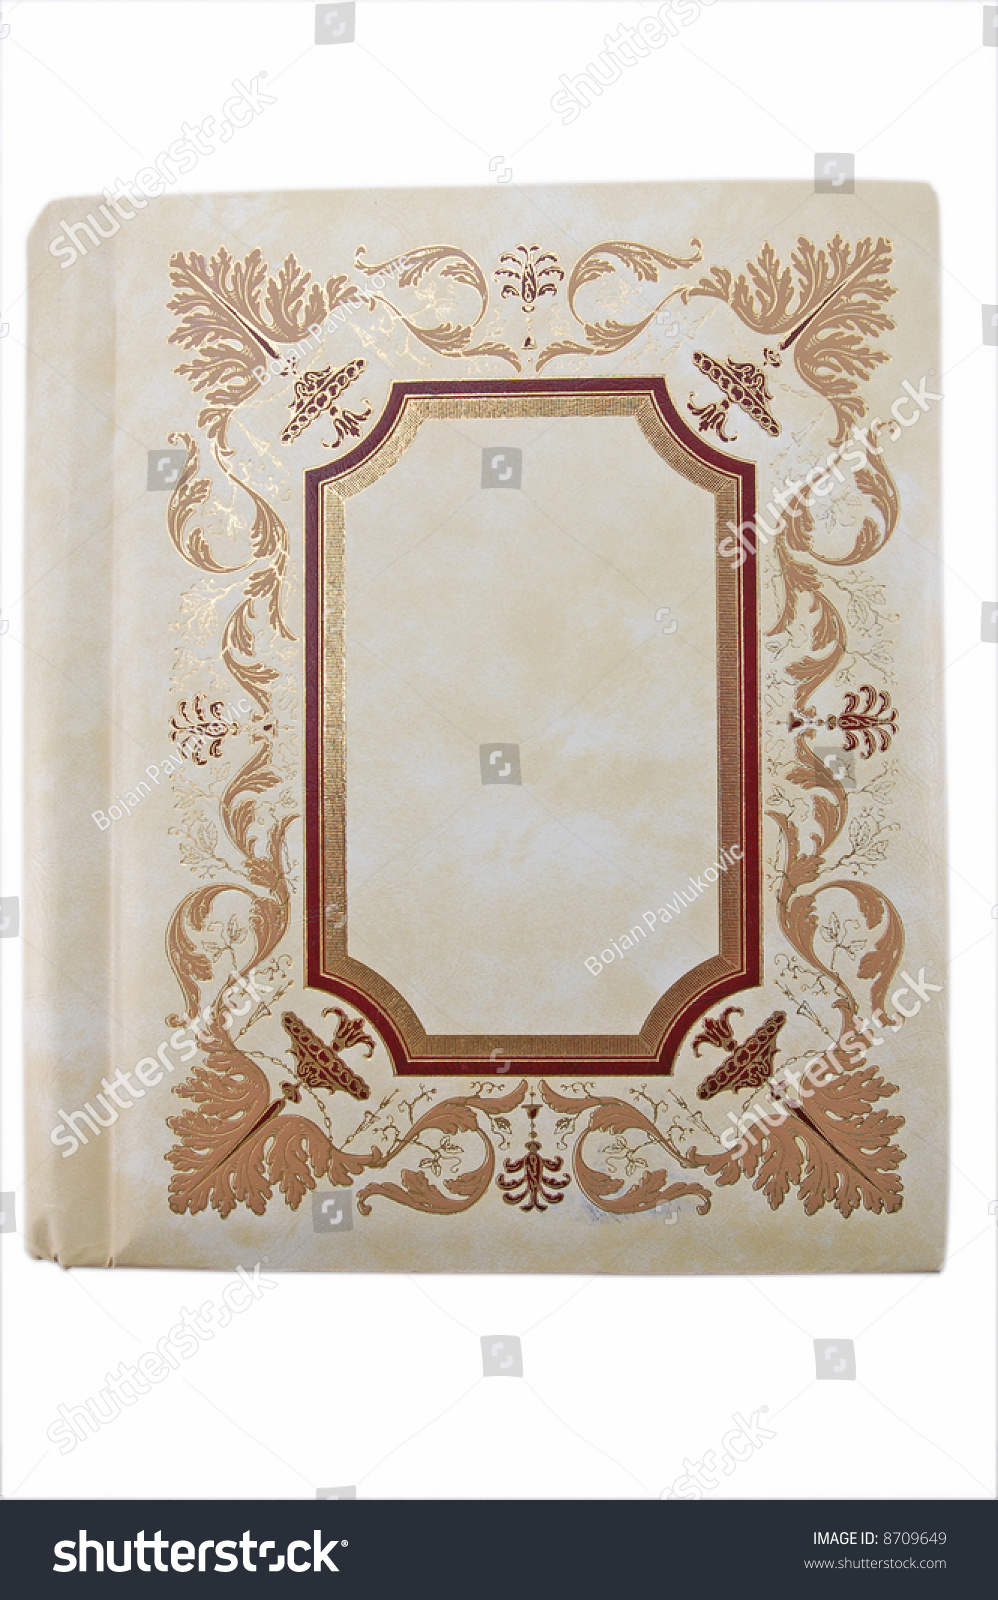 Old Fashioned Photo Album Stock Photo (Edit Now) 8709649 - Shutterstock